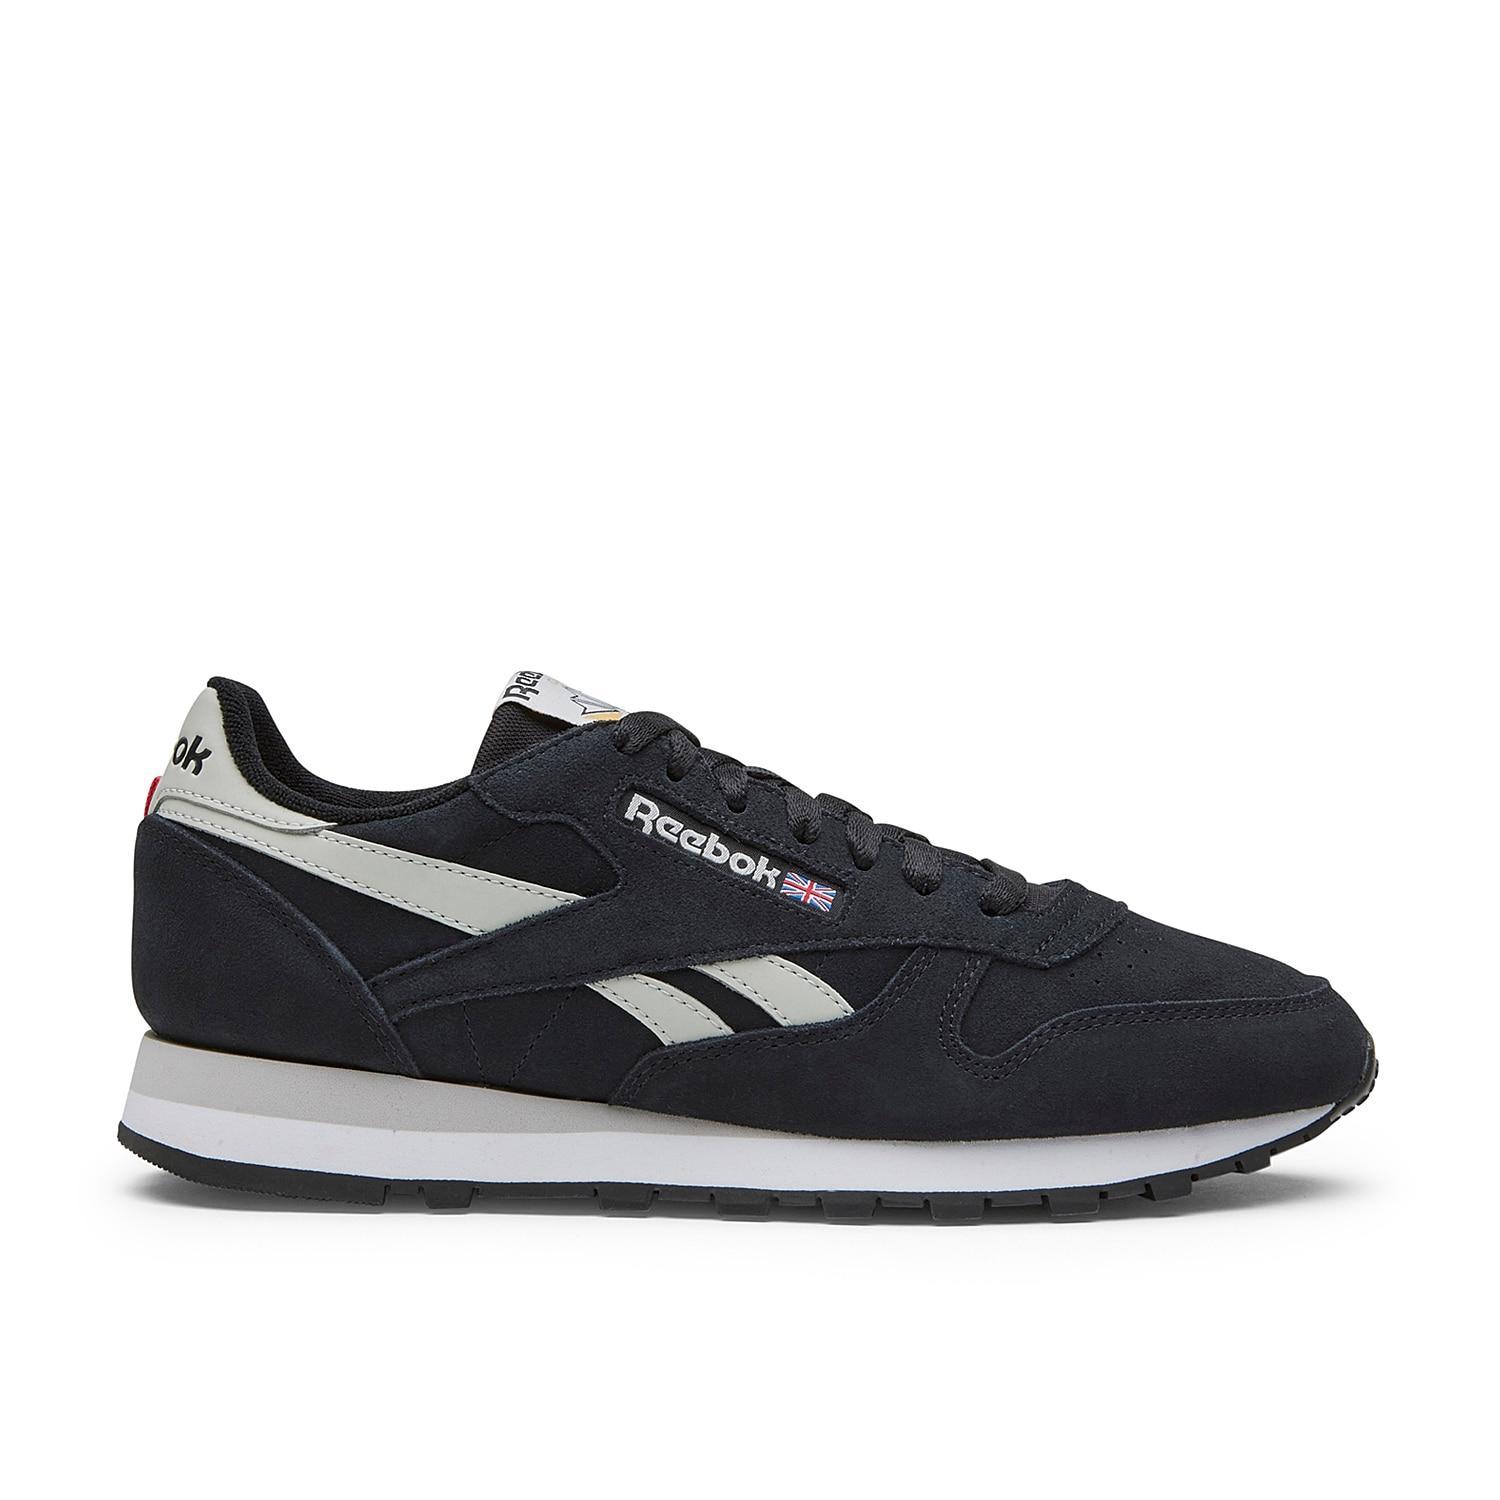 Reebok Classic Leather Sneaker Product Image